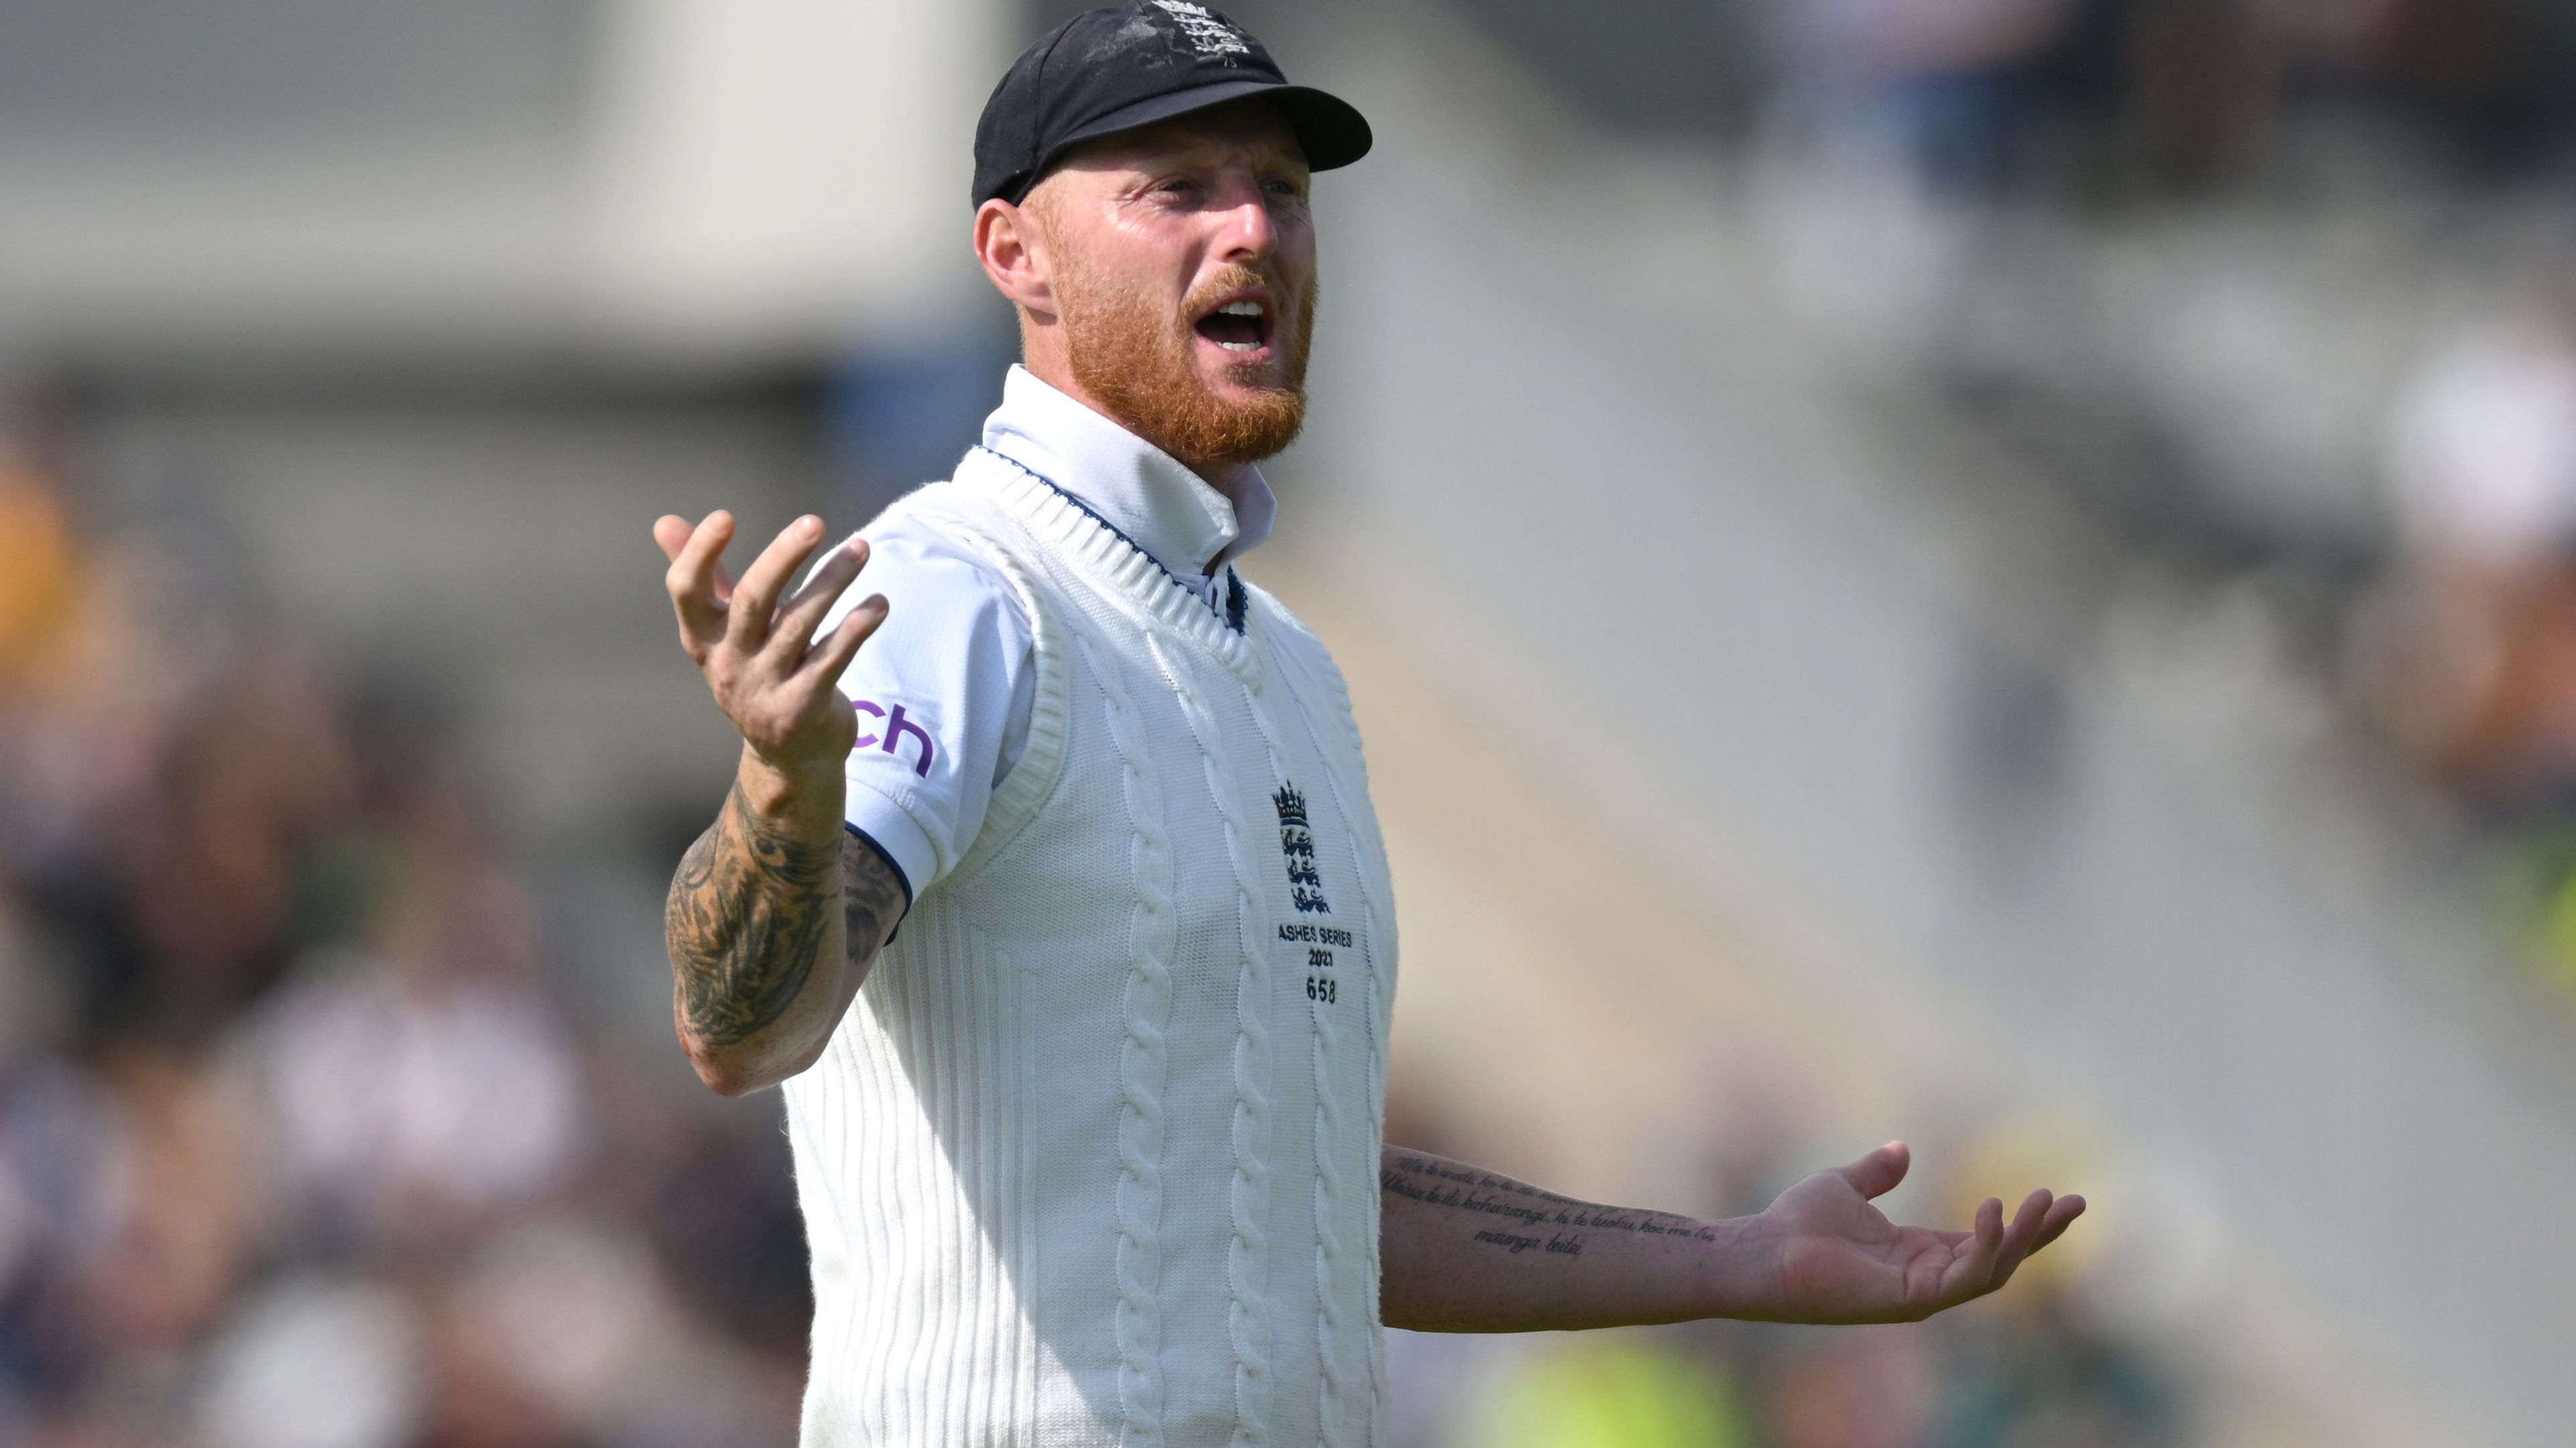 MANCHESTER, ENGLAND - JULY 21: England captain Ben Stokes during day three of the LV= Insurance Ashes 4th Test Match between England and Australia at Emirates Old Trafford on July 21, 2023 in Manchester, England. (Photo by Gareth Copley - ECB/ECB via Getty Images)